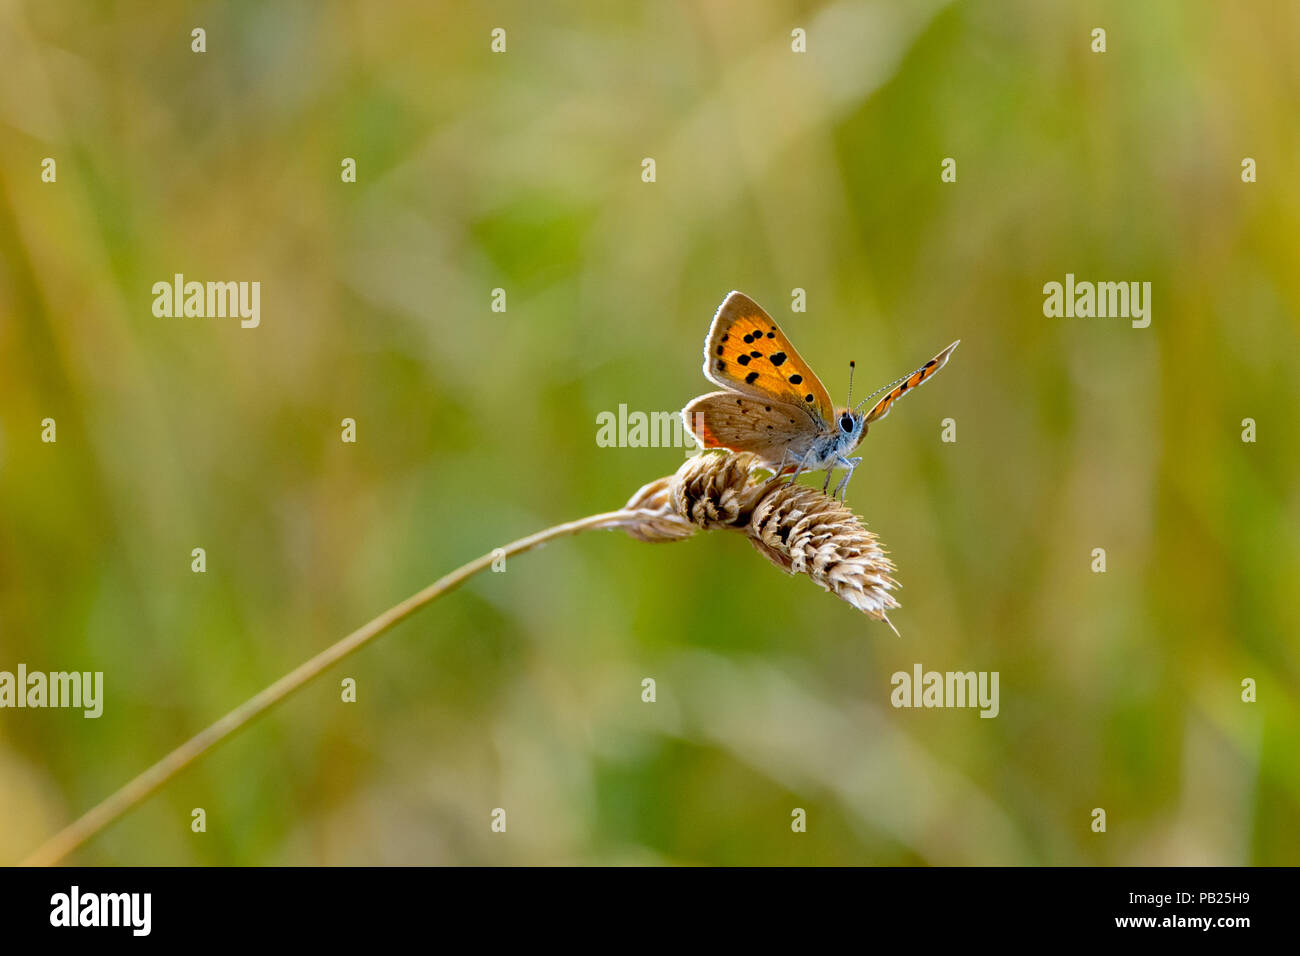 Large Copper butterfly (Lycaena dispar) resting on dried wild grass seed head Hertford, Hertfordshire, UK Stock Photo